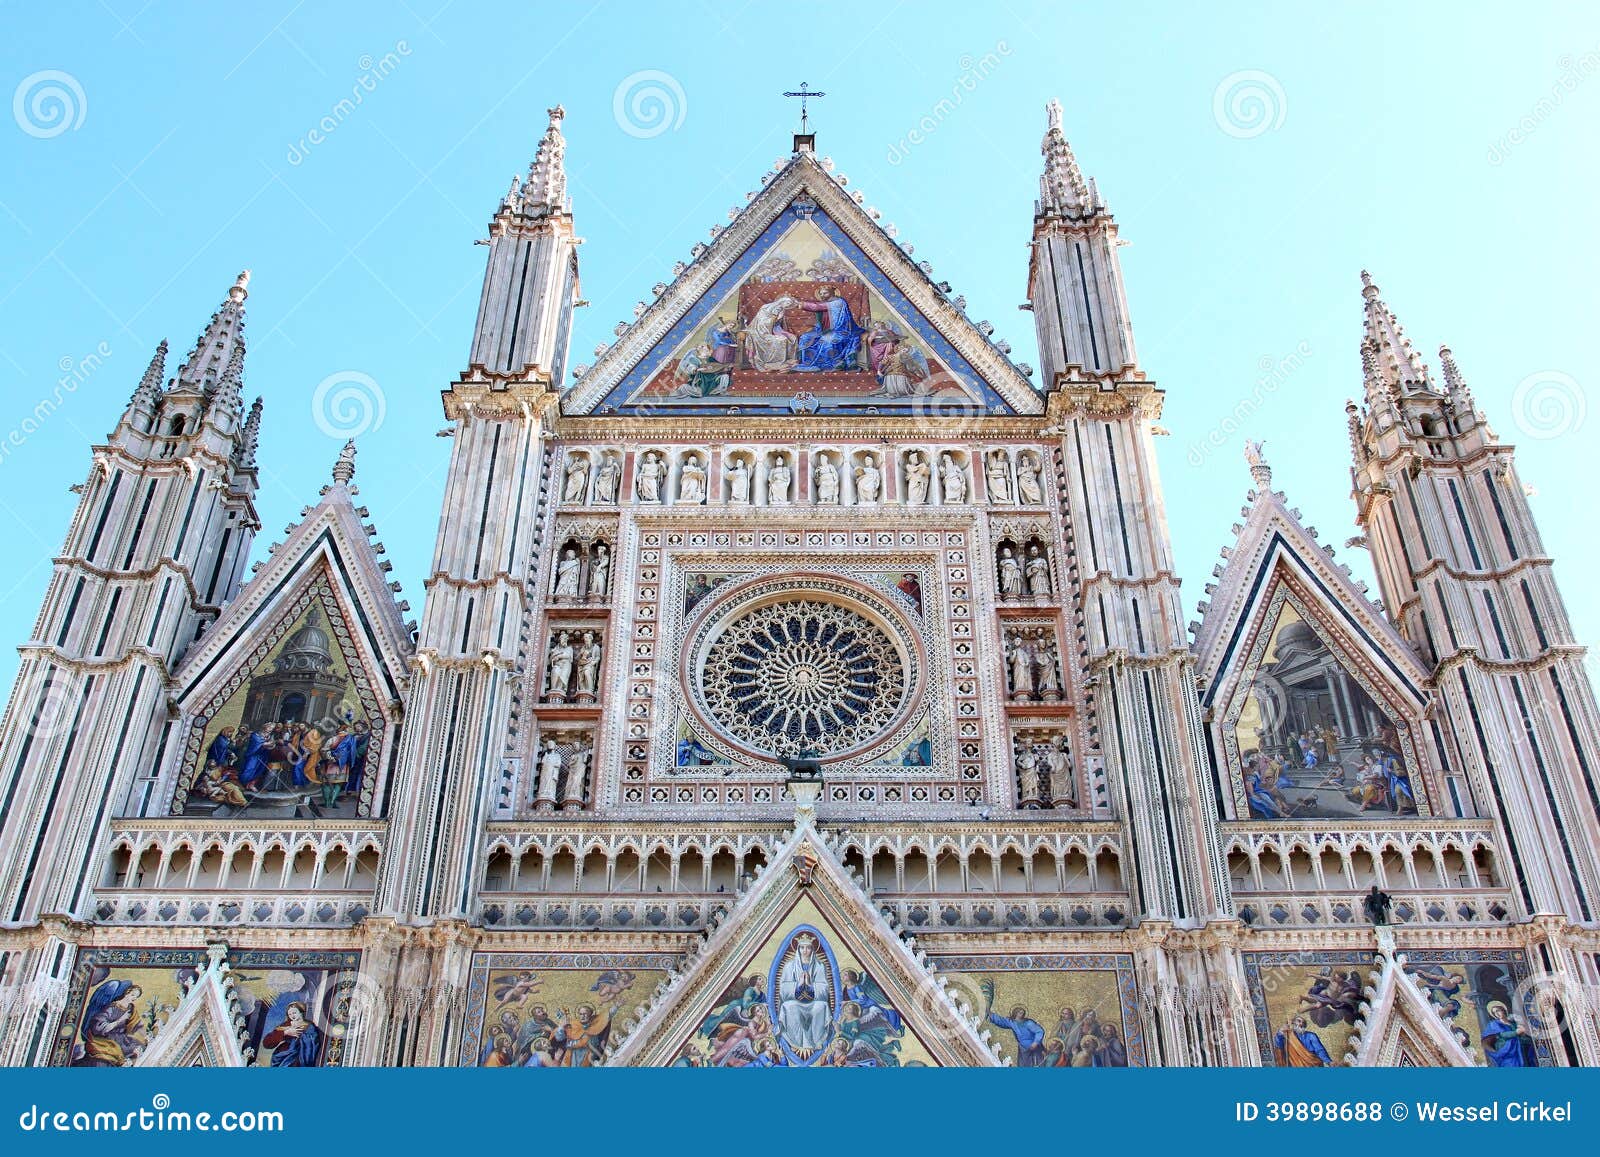 facade of orvieto cathedral, italy